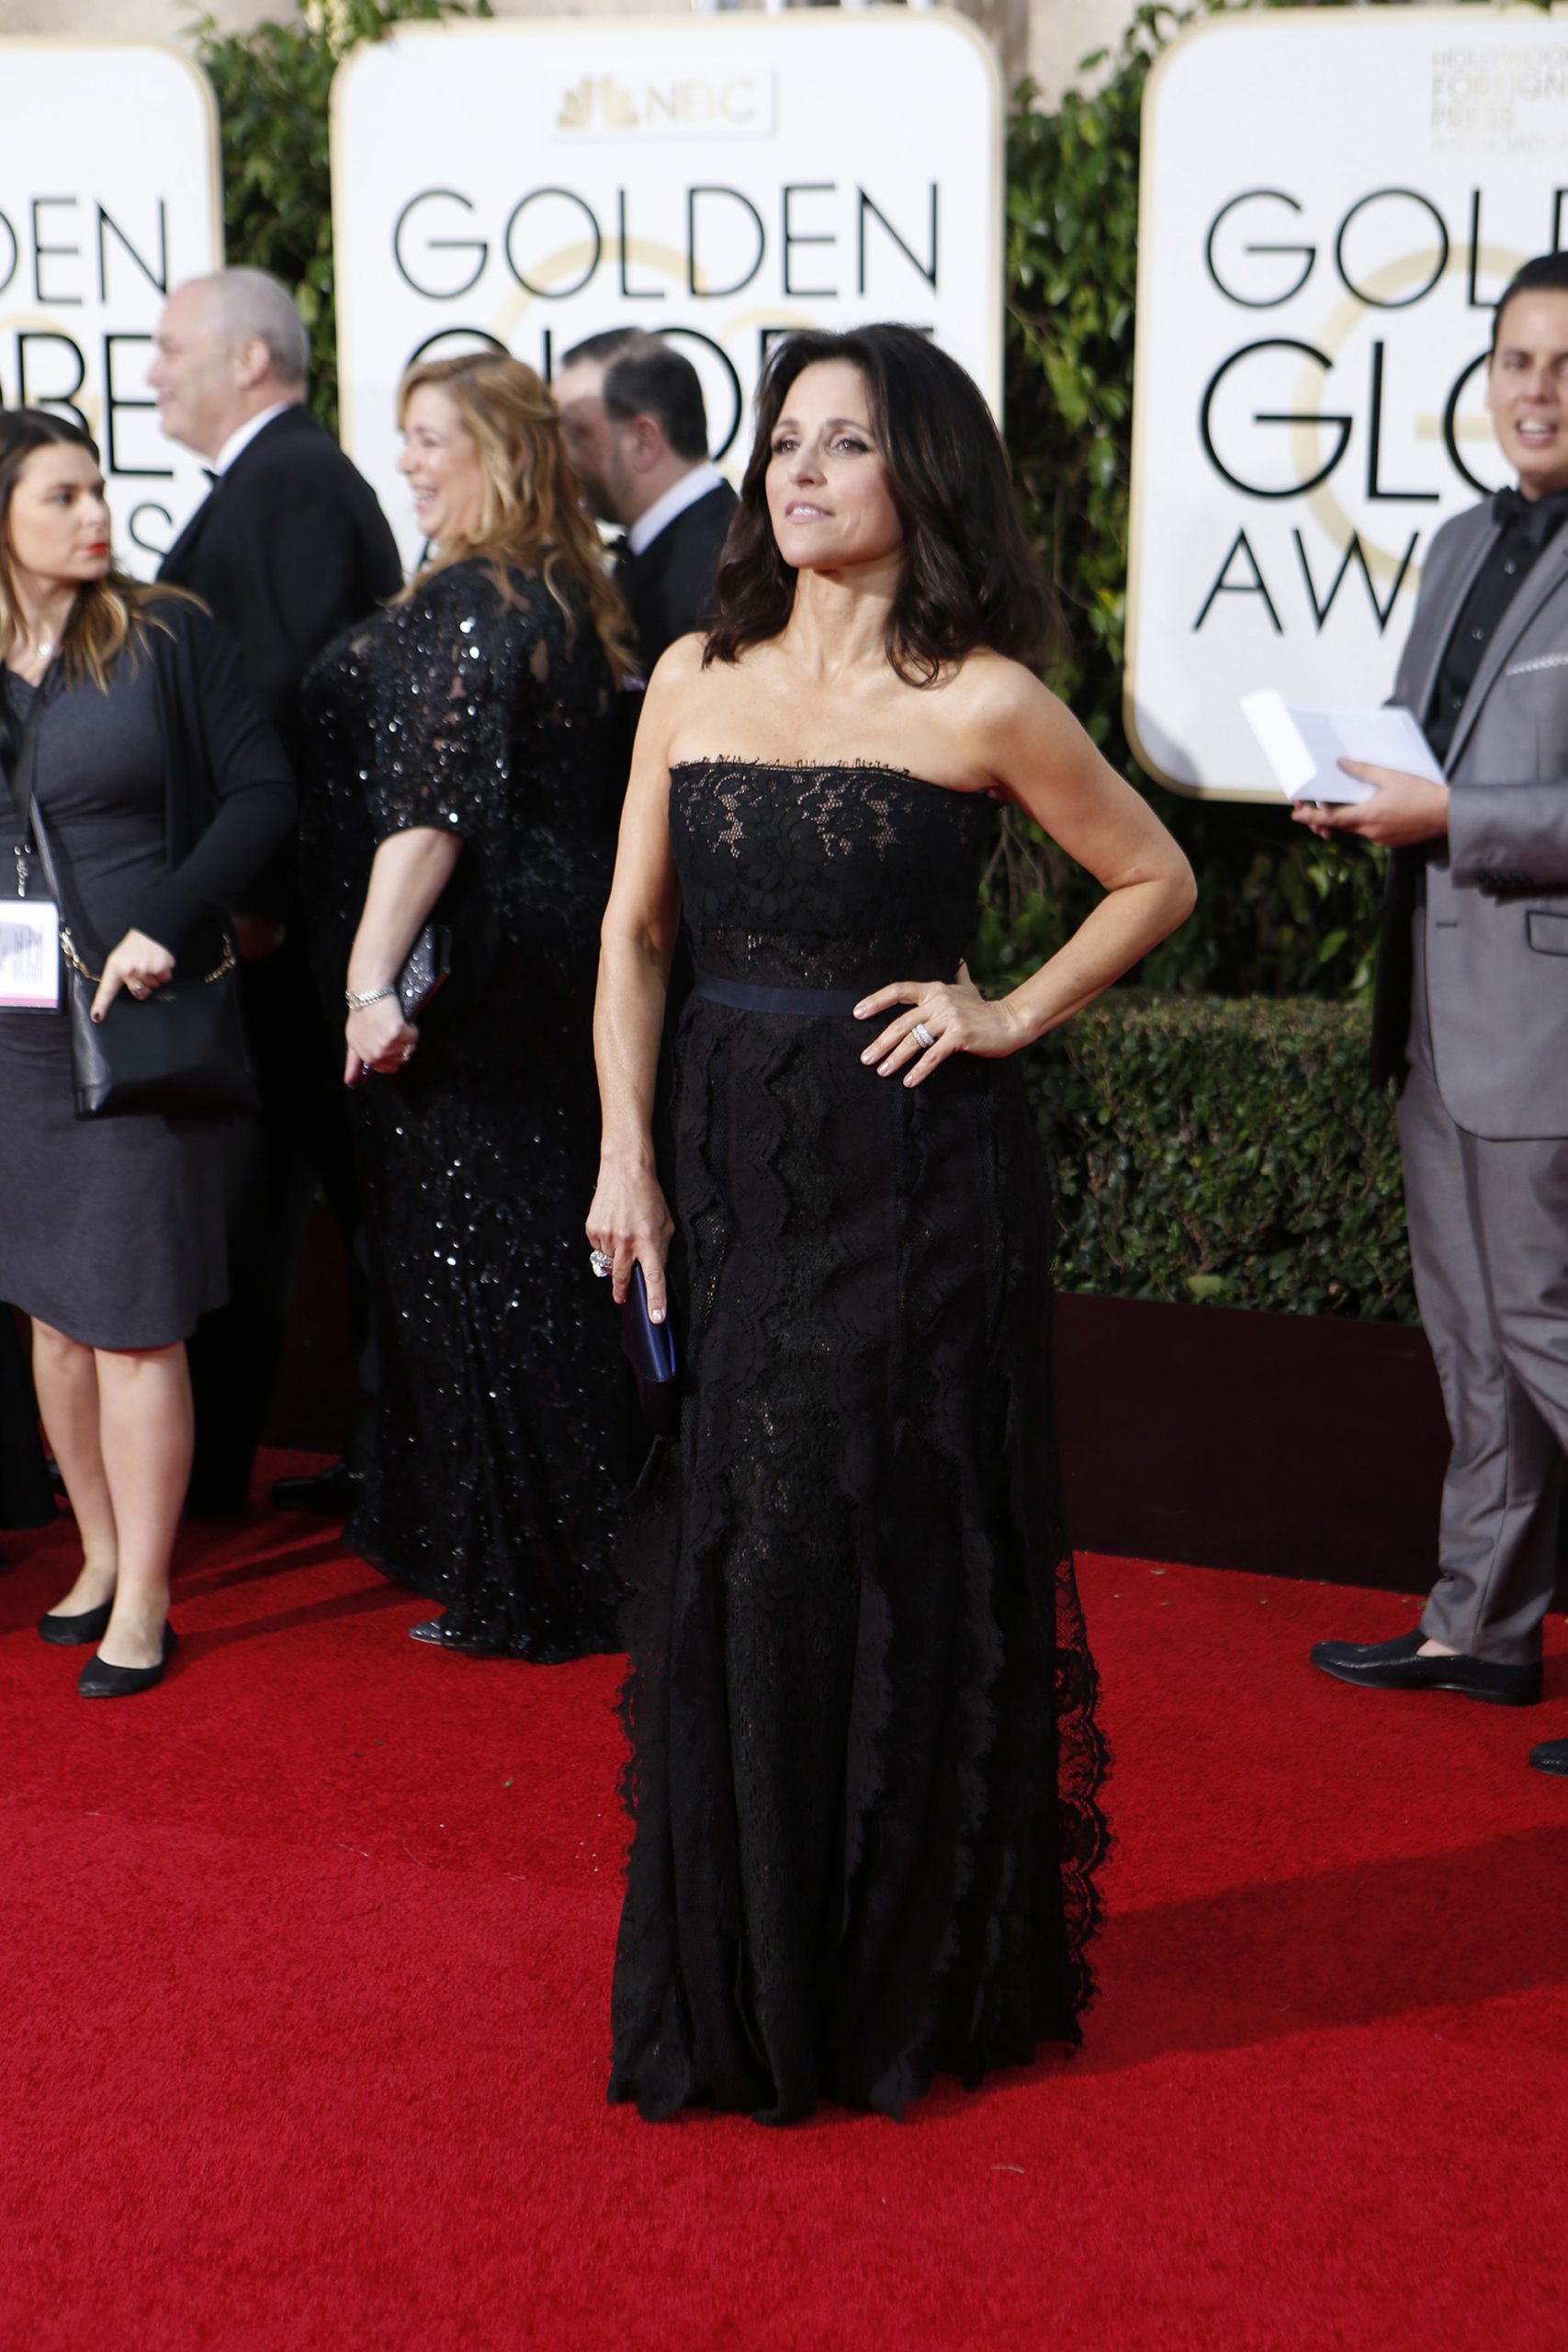 Julia Louis Dreyfuss arrives at the 73rd Annual Golden Globe Awards show at the Beverly Hilton Hotel in Beverly Hills, Calif., on Sunday, Jan. 10, 2016. CREDIT: Wally Skalij/Los Angeles Times/TNS)